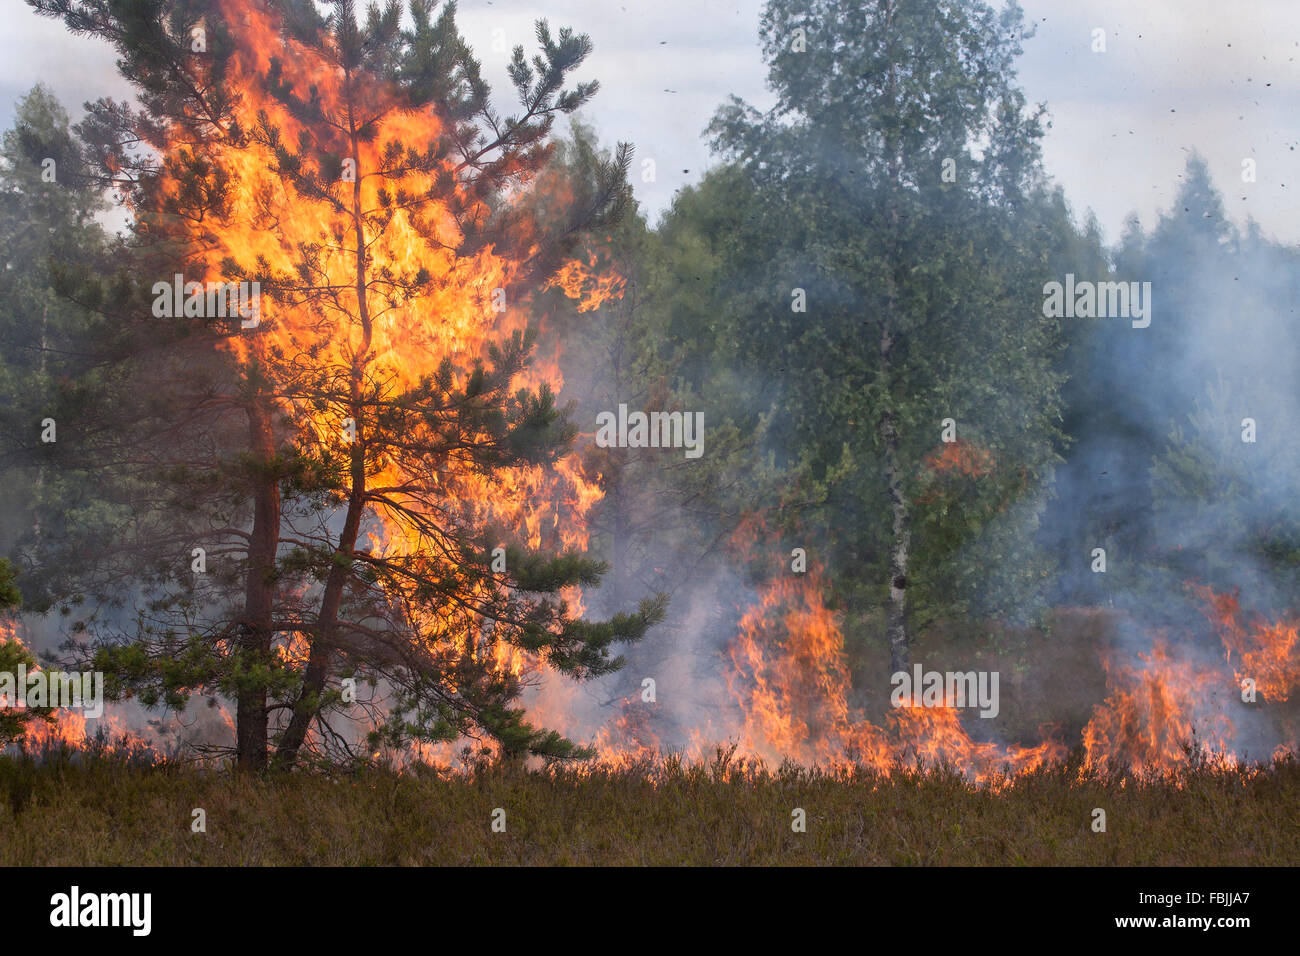 Forest fire Stock Photo